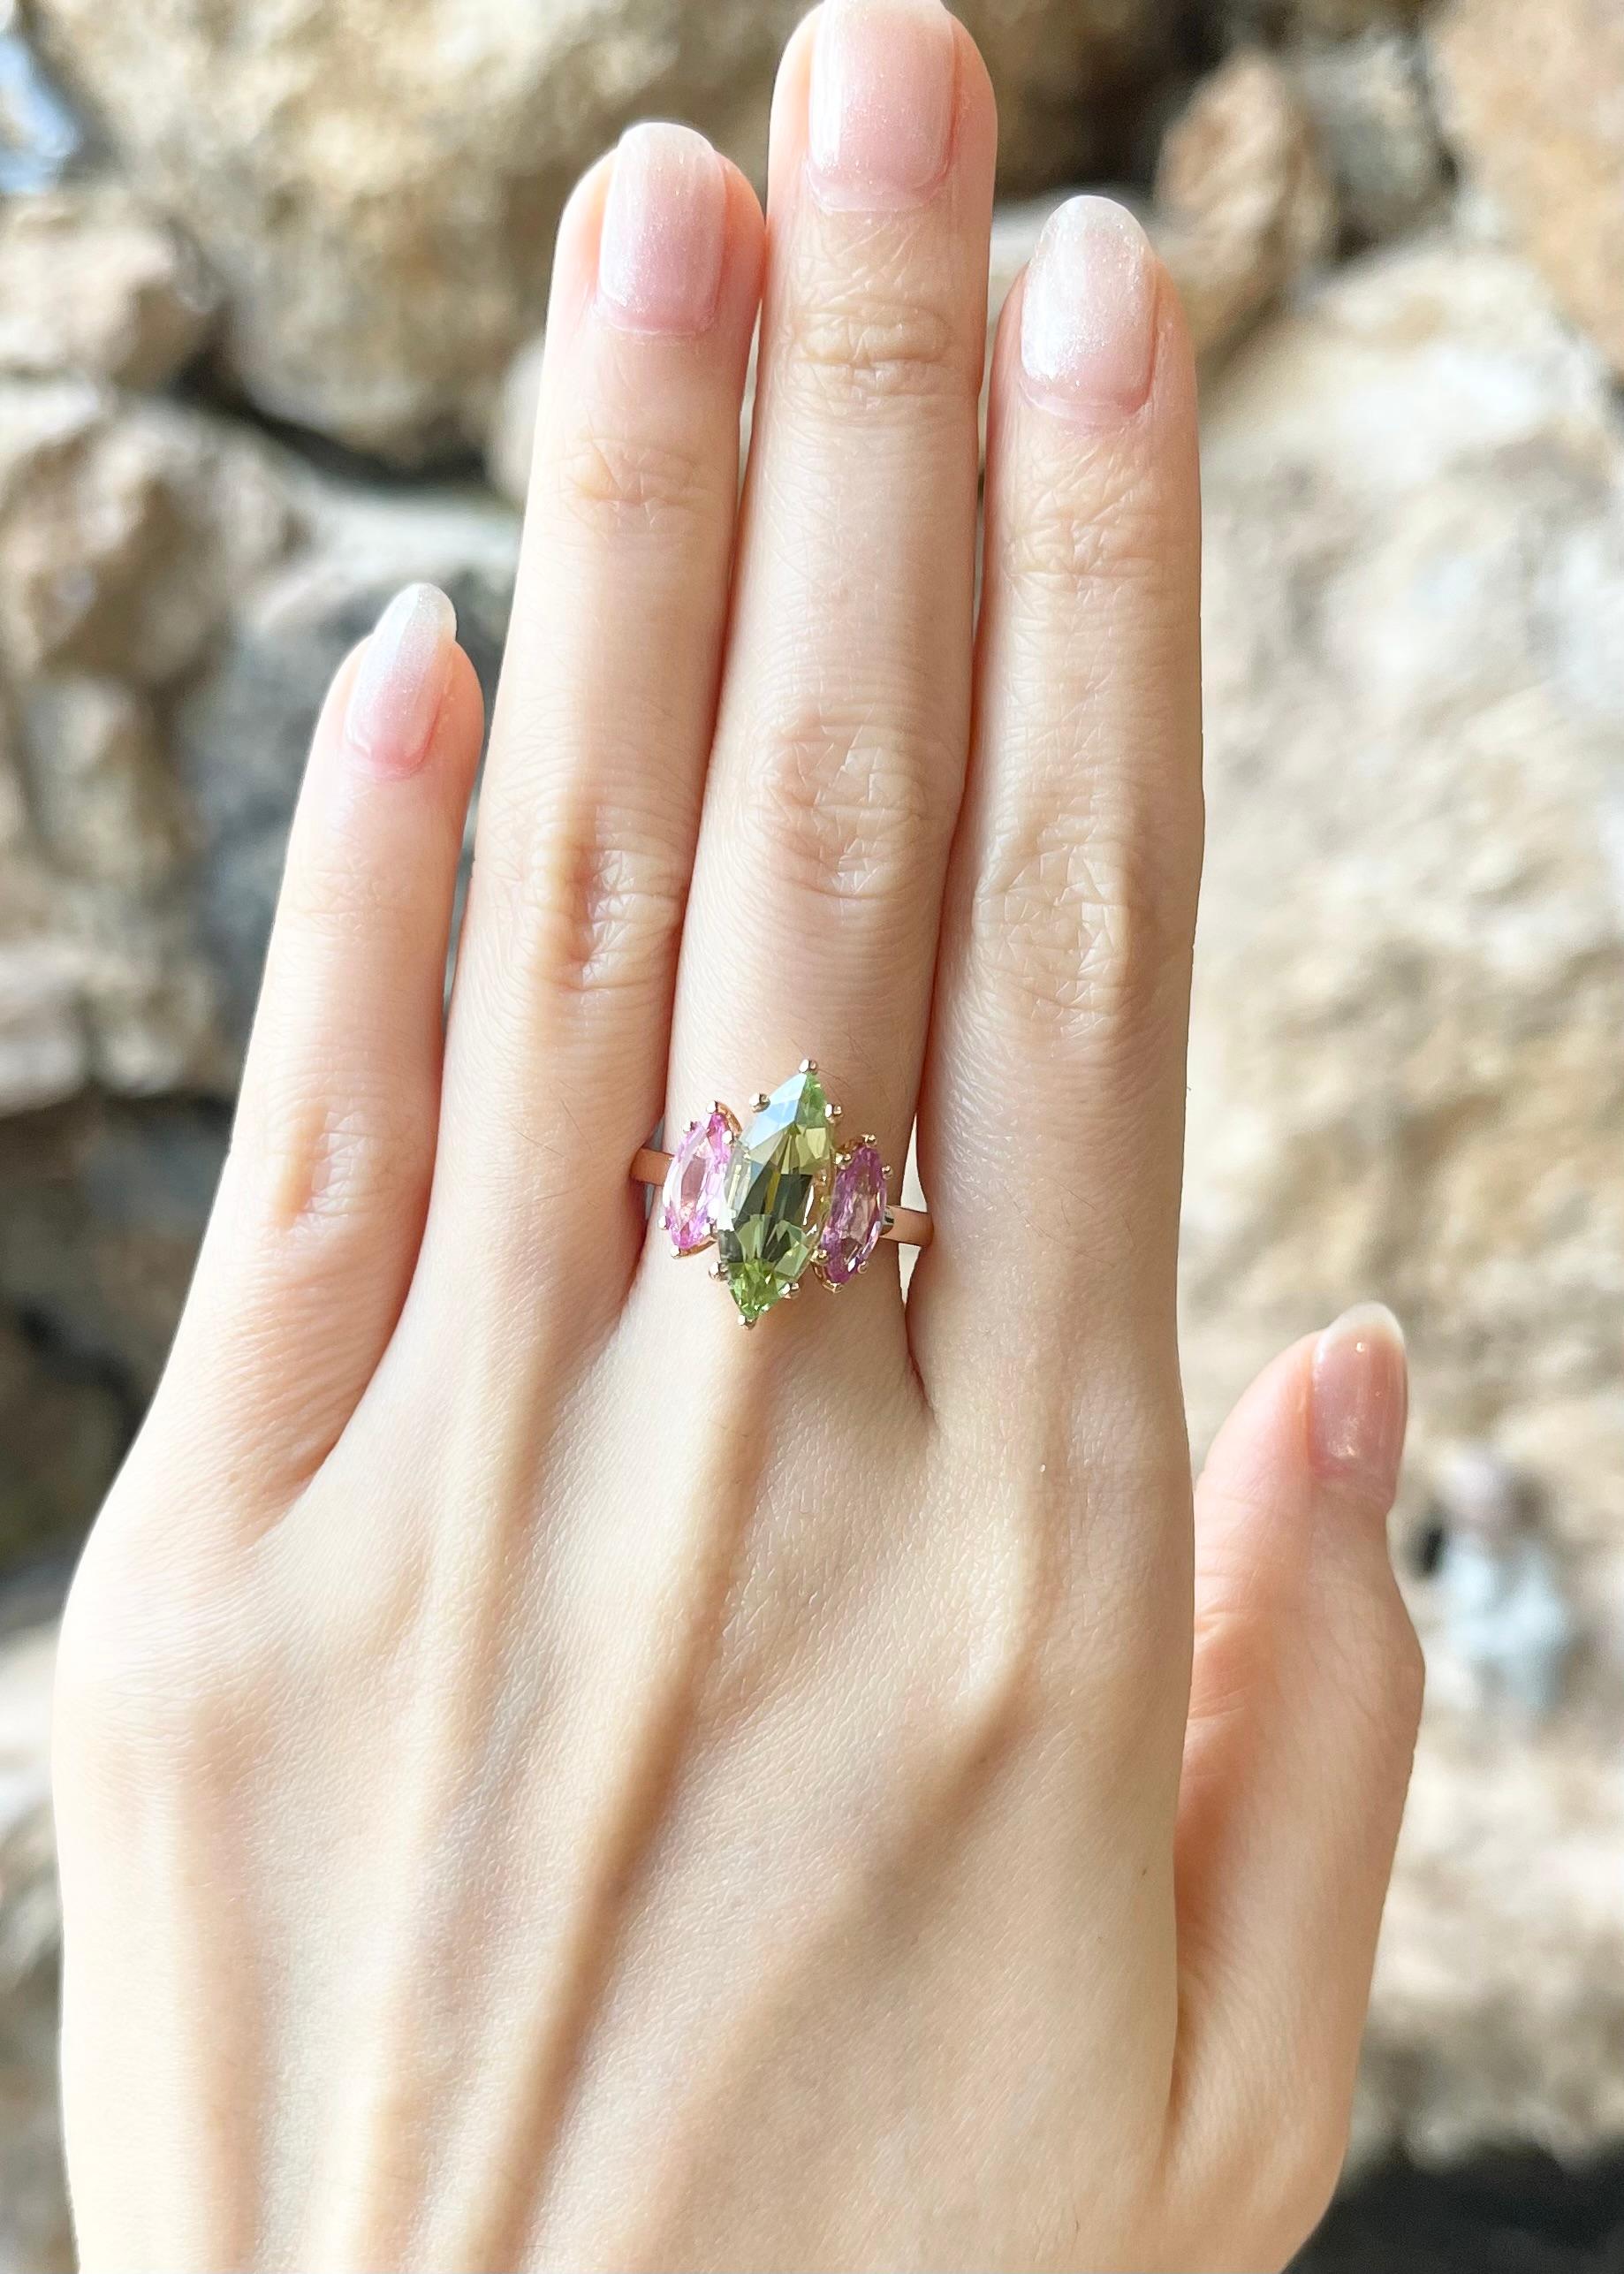 Green Tourmaline 6.64 carats and Pink Sapphire 1.43 carats Ring set in 18K Rose Gold Settings

Width:  1.3 cm 
Length: 1.6 cm
Ring Size: 52
Total Weight: 5.89 grams

